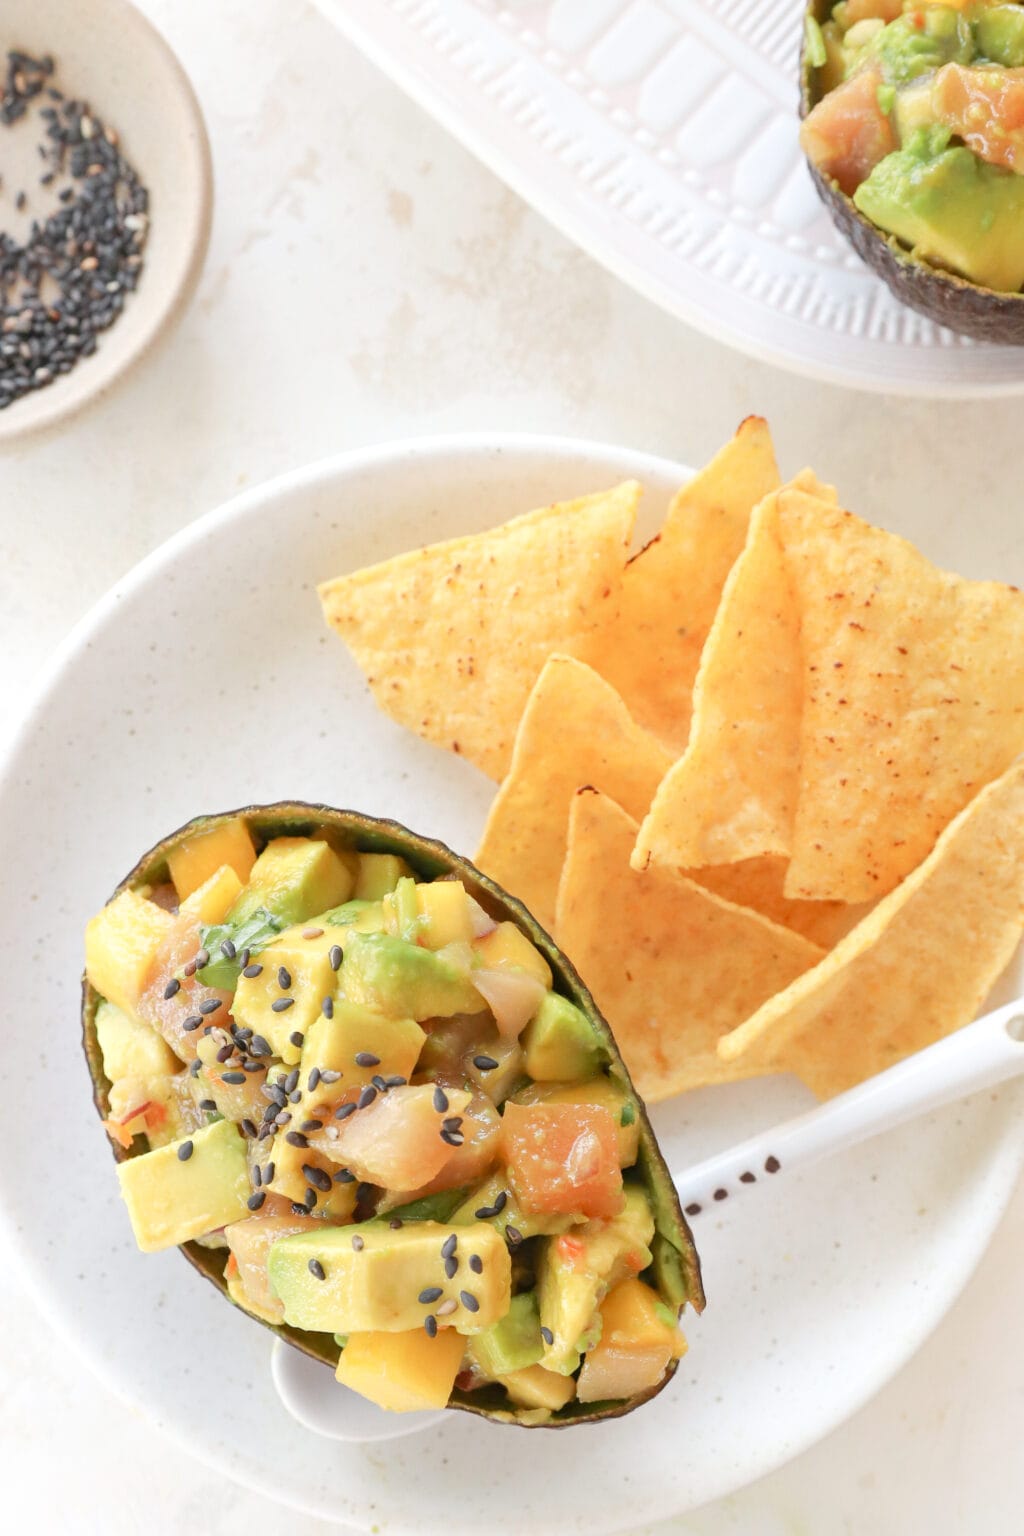 An avocado skin filled with cubed avocado, tuna and mango habanero salsa is on a white plate. There is a white spoon under the avocado and beside it are some chips.